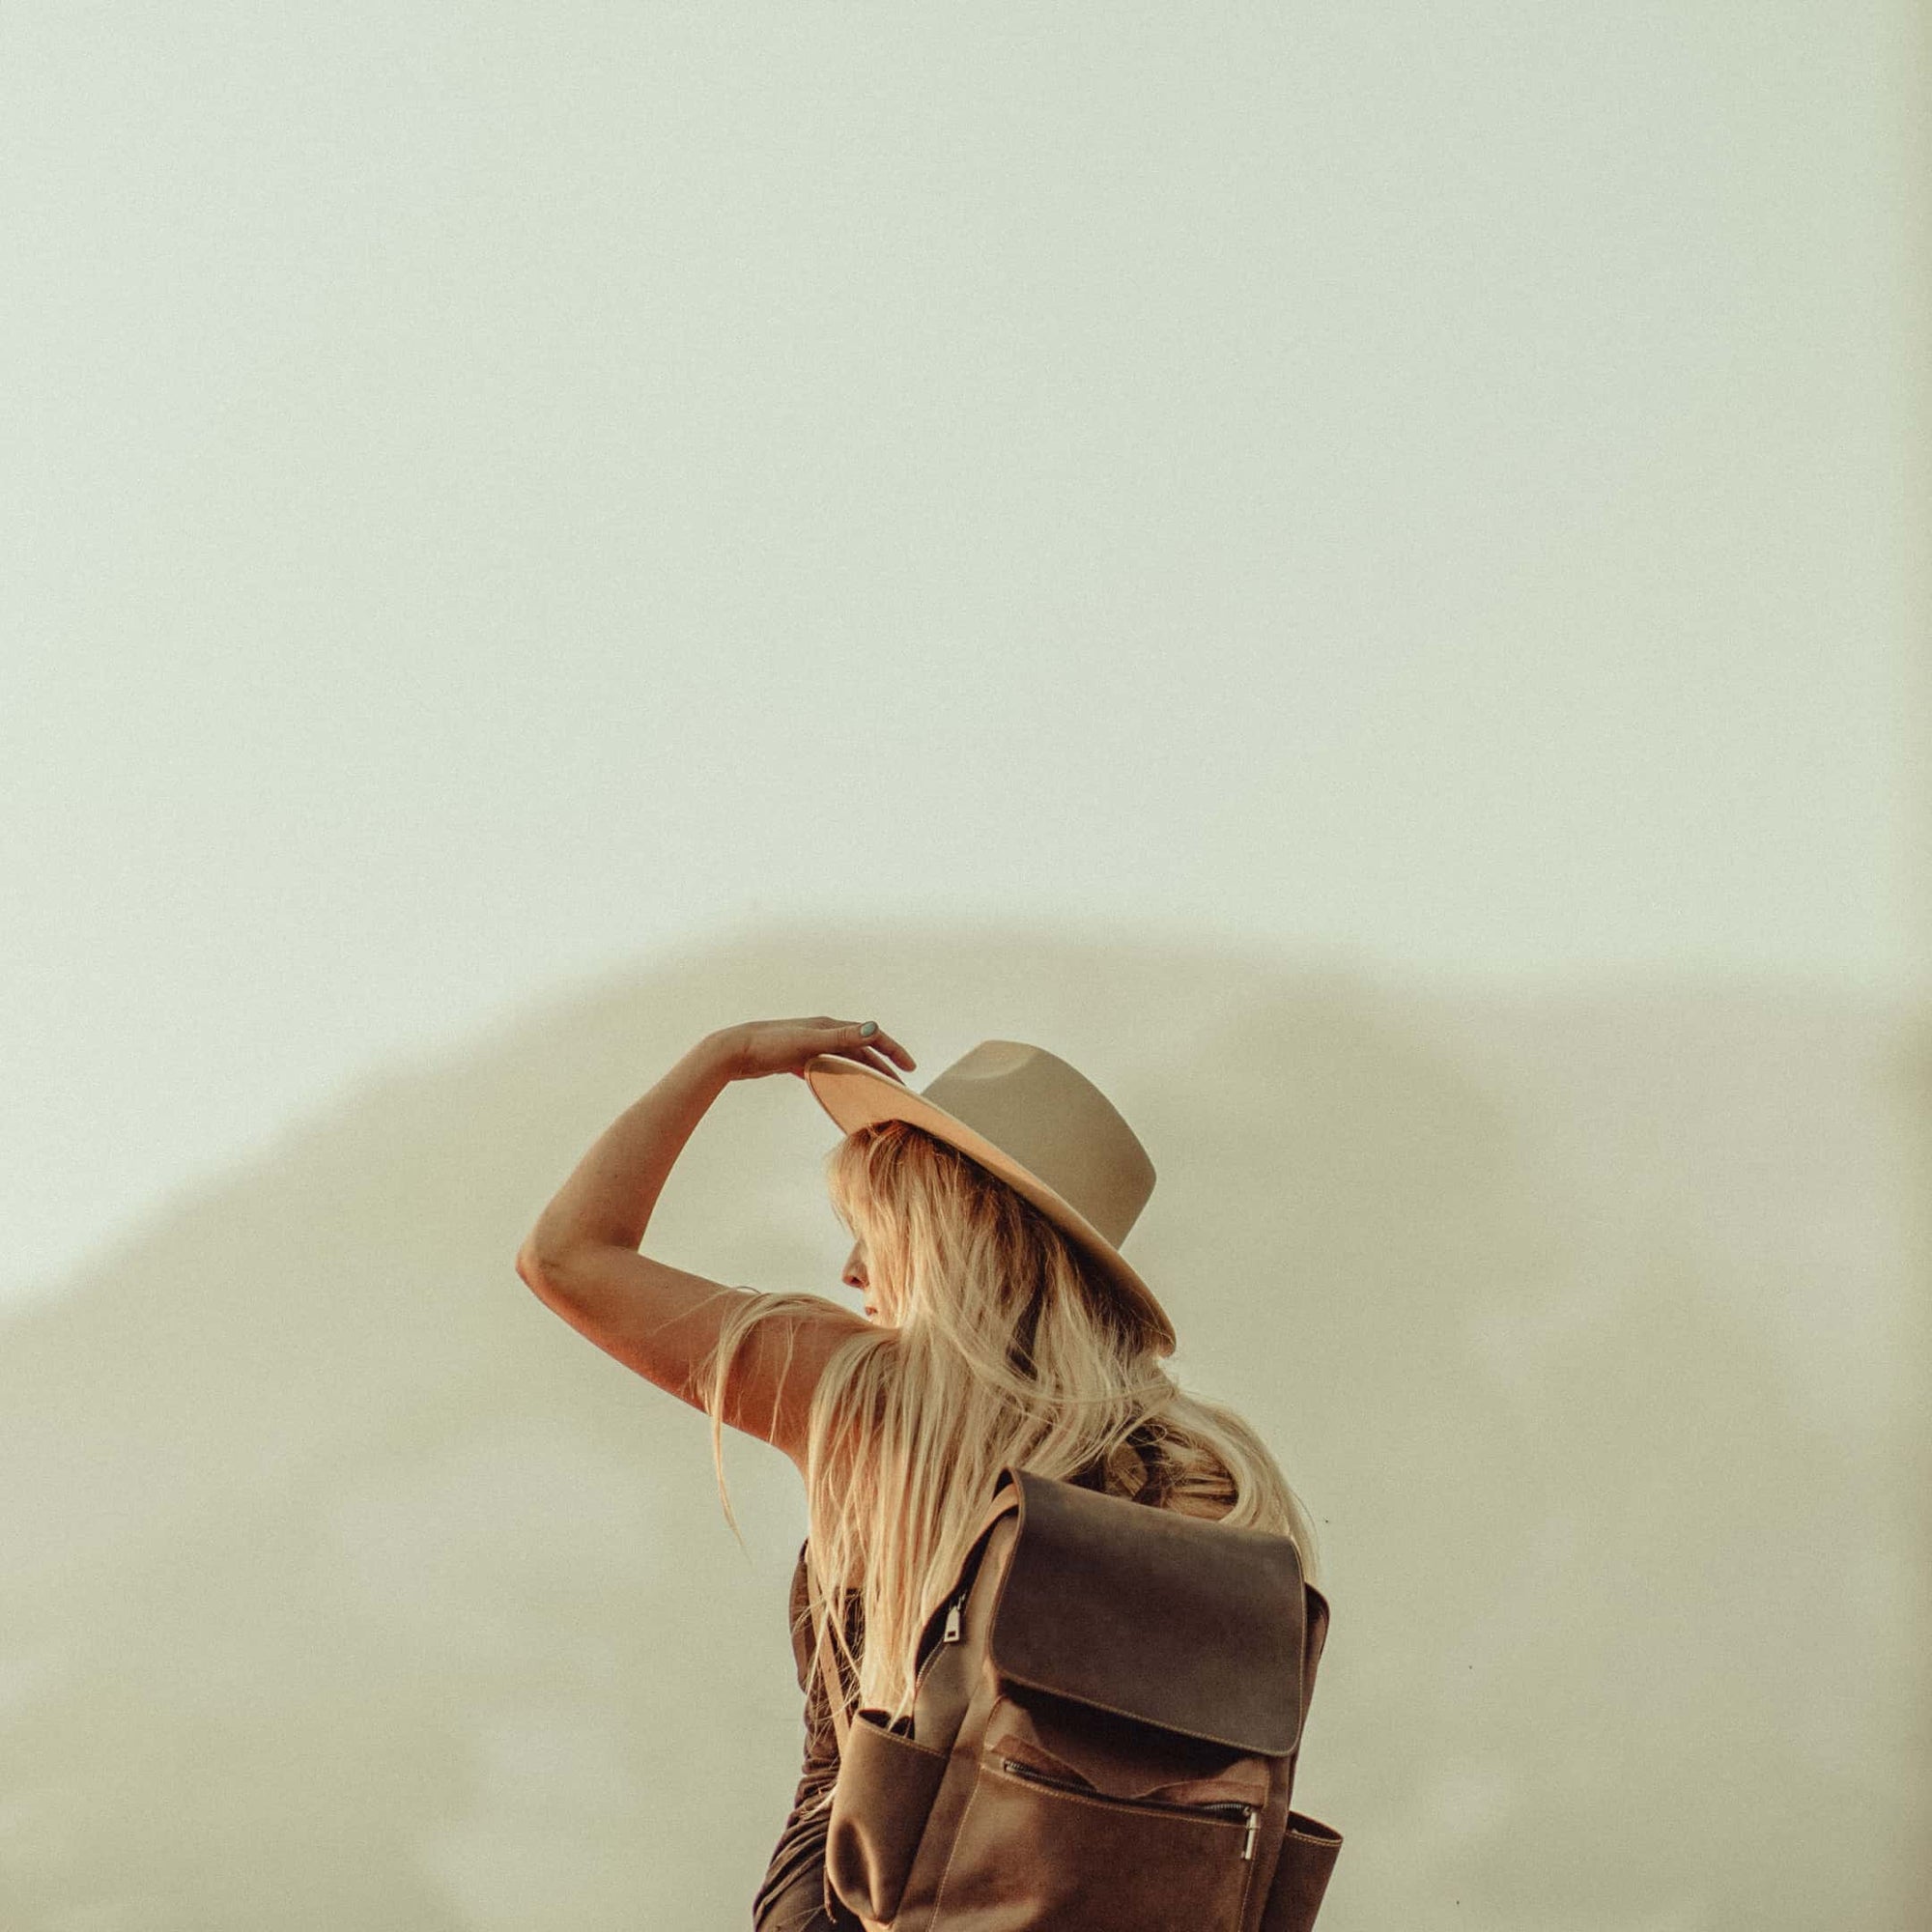 A woman wearing a backpack holds on to the front of her wide brim hat while hiking through a national park